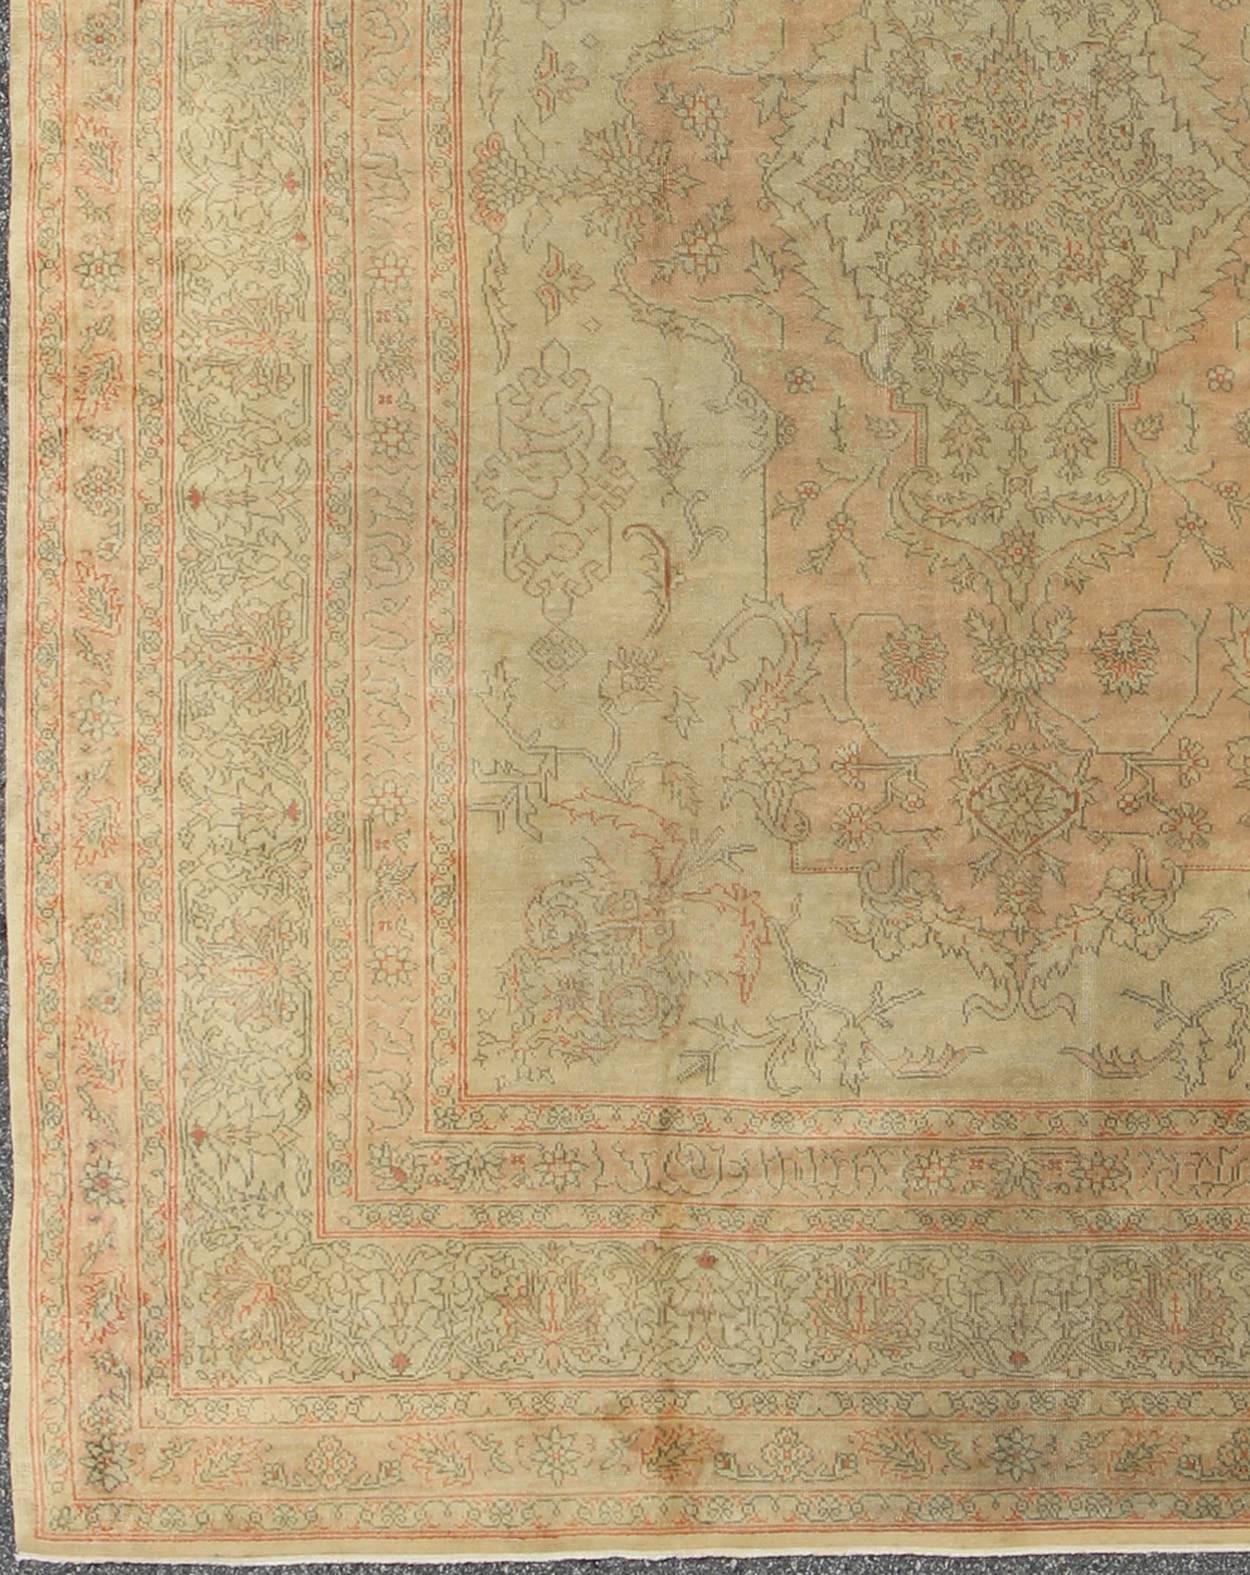 Antique Turkish Oushak Carpet with Intricate Medallion Design, Keivan Woven Arts/ rug/13-0503,  origin/ Turkey, Circa 1910

Measures: 8.11 x 11.8.

This antique Turkish Oushak carpet from the early 20th century features a remarkable soft color